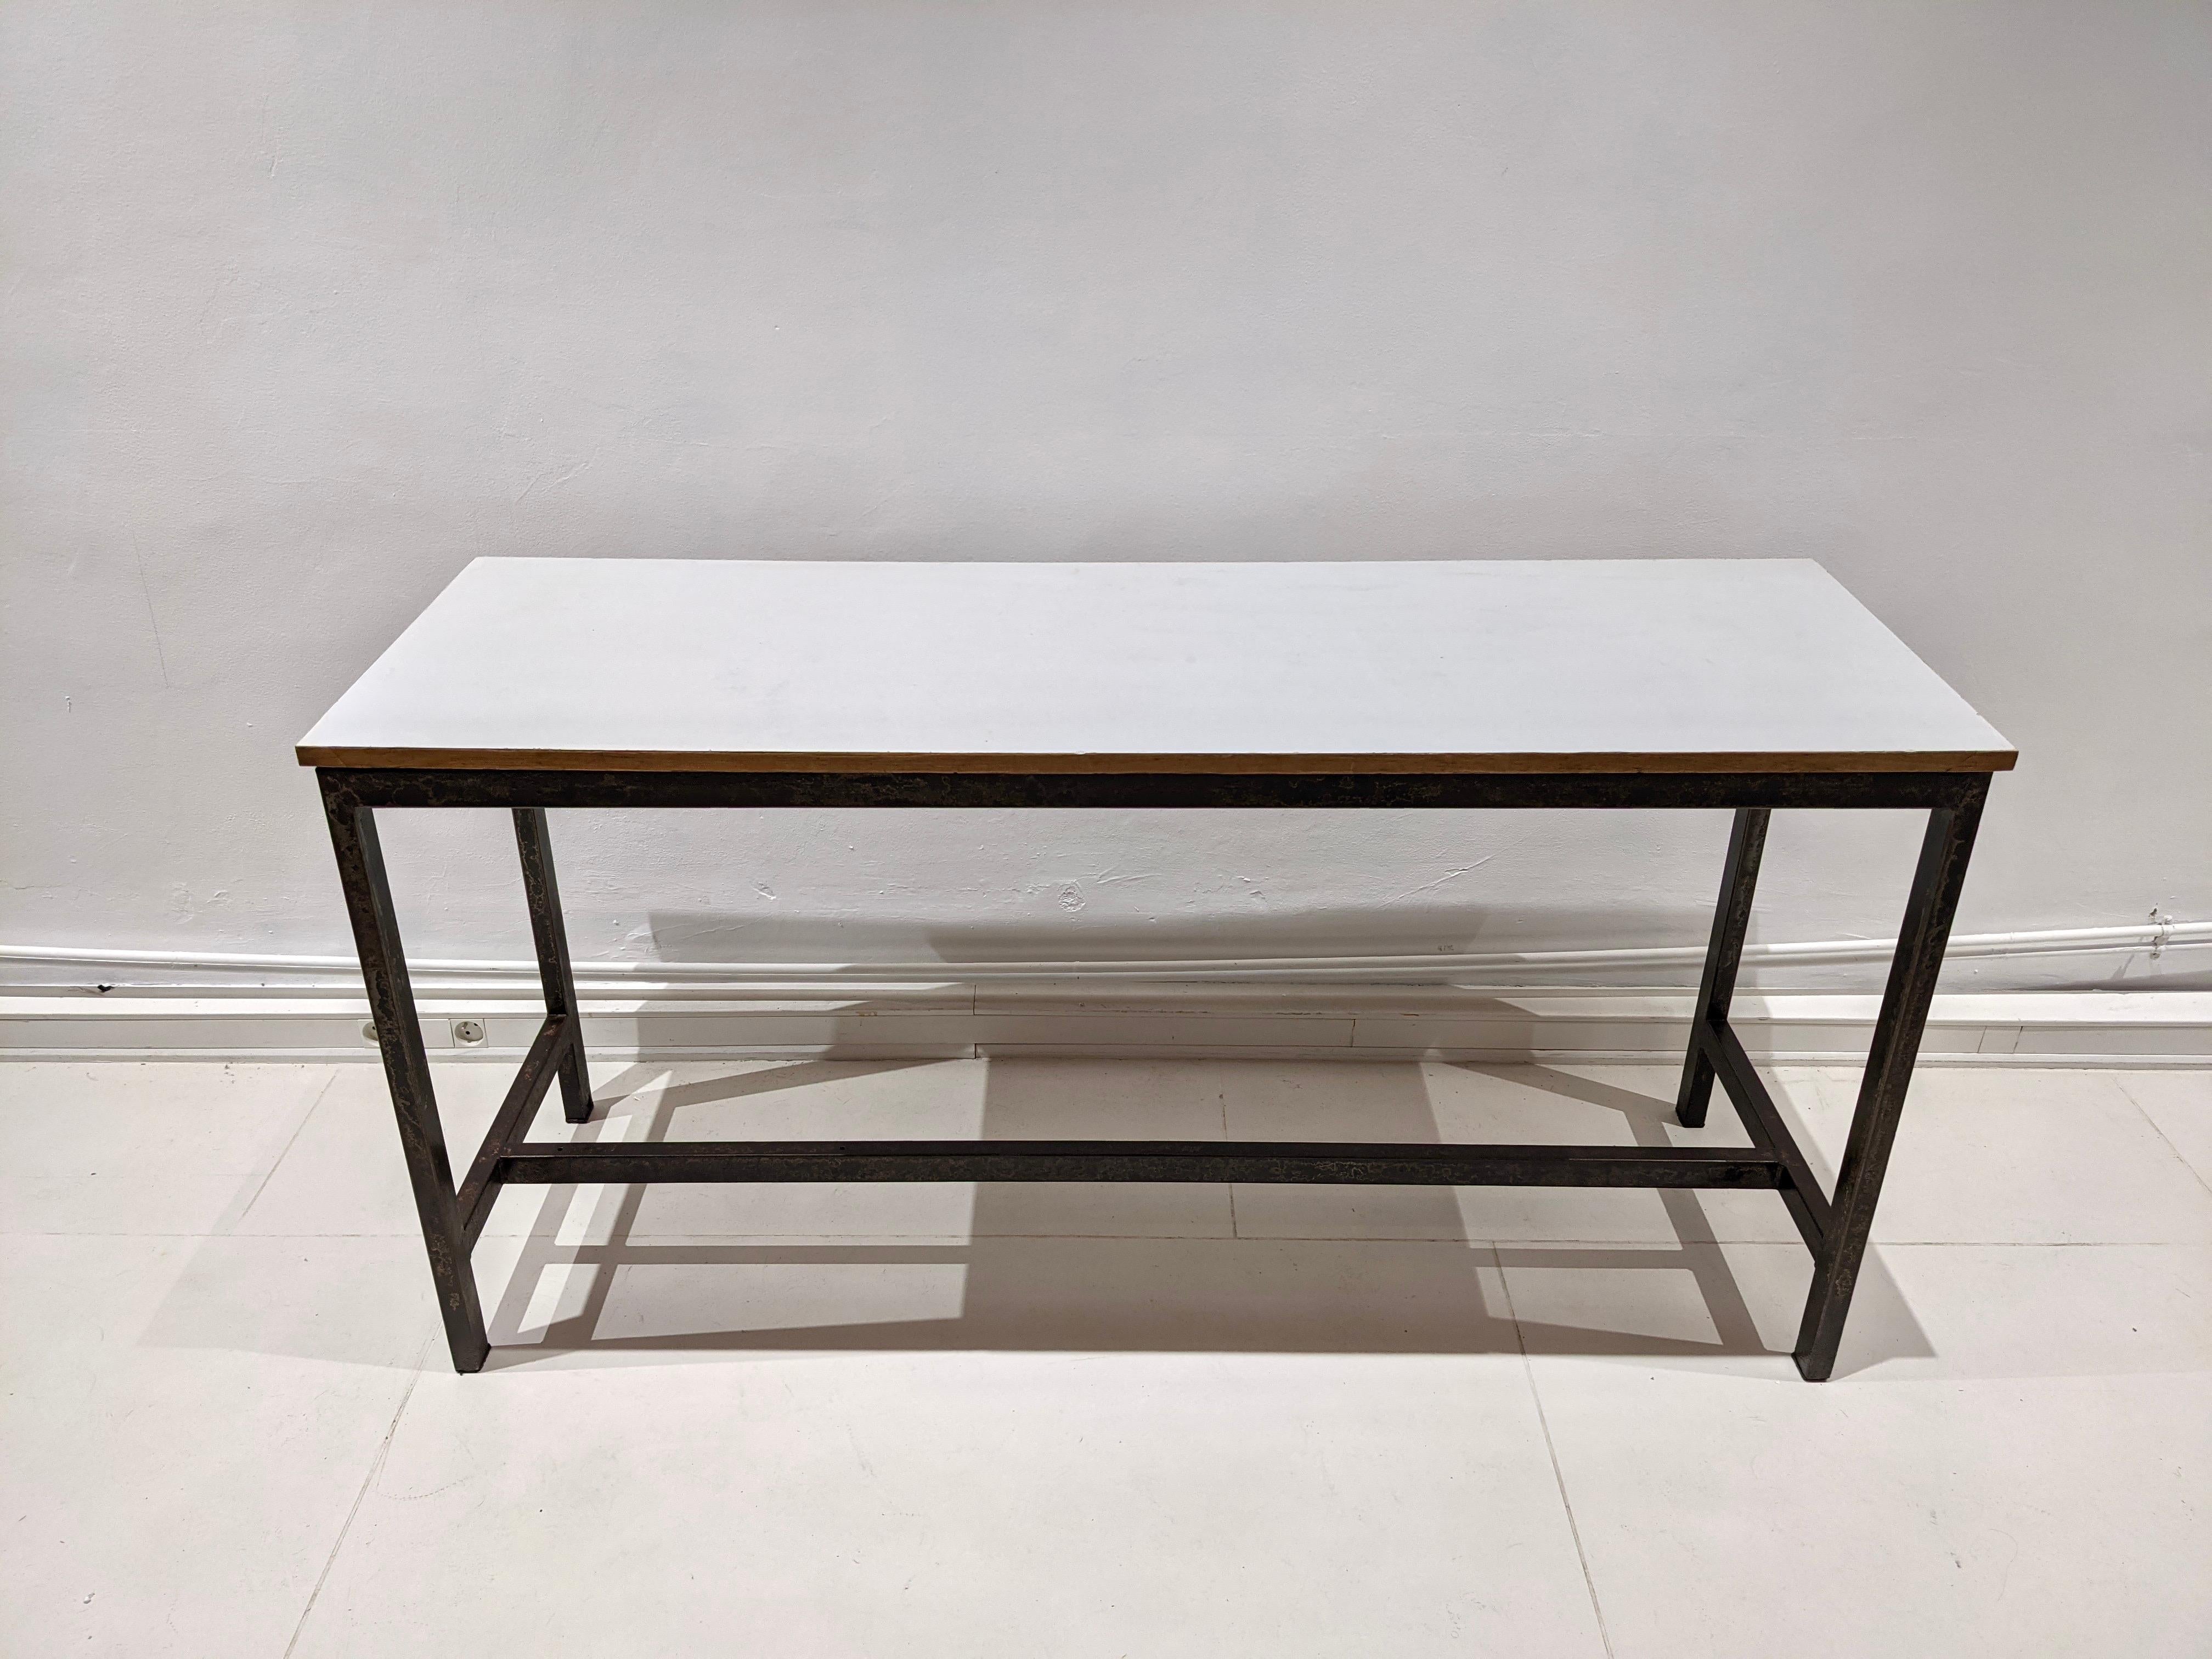 Cansado console table by Charlotte Perriand. Wooden top. Year 1954. Steph Simon edition. Very good condition.
Origin: Mining town dof Cansado, Mauritania, Africa.